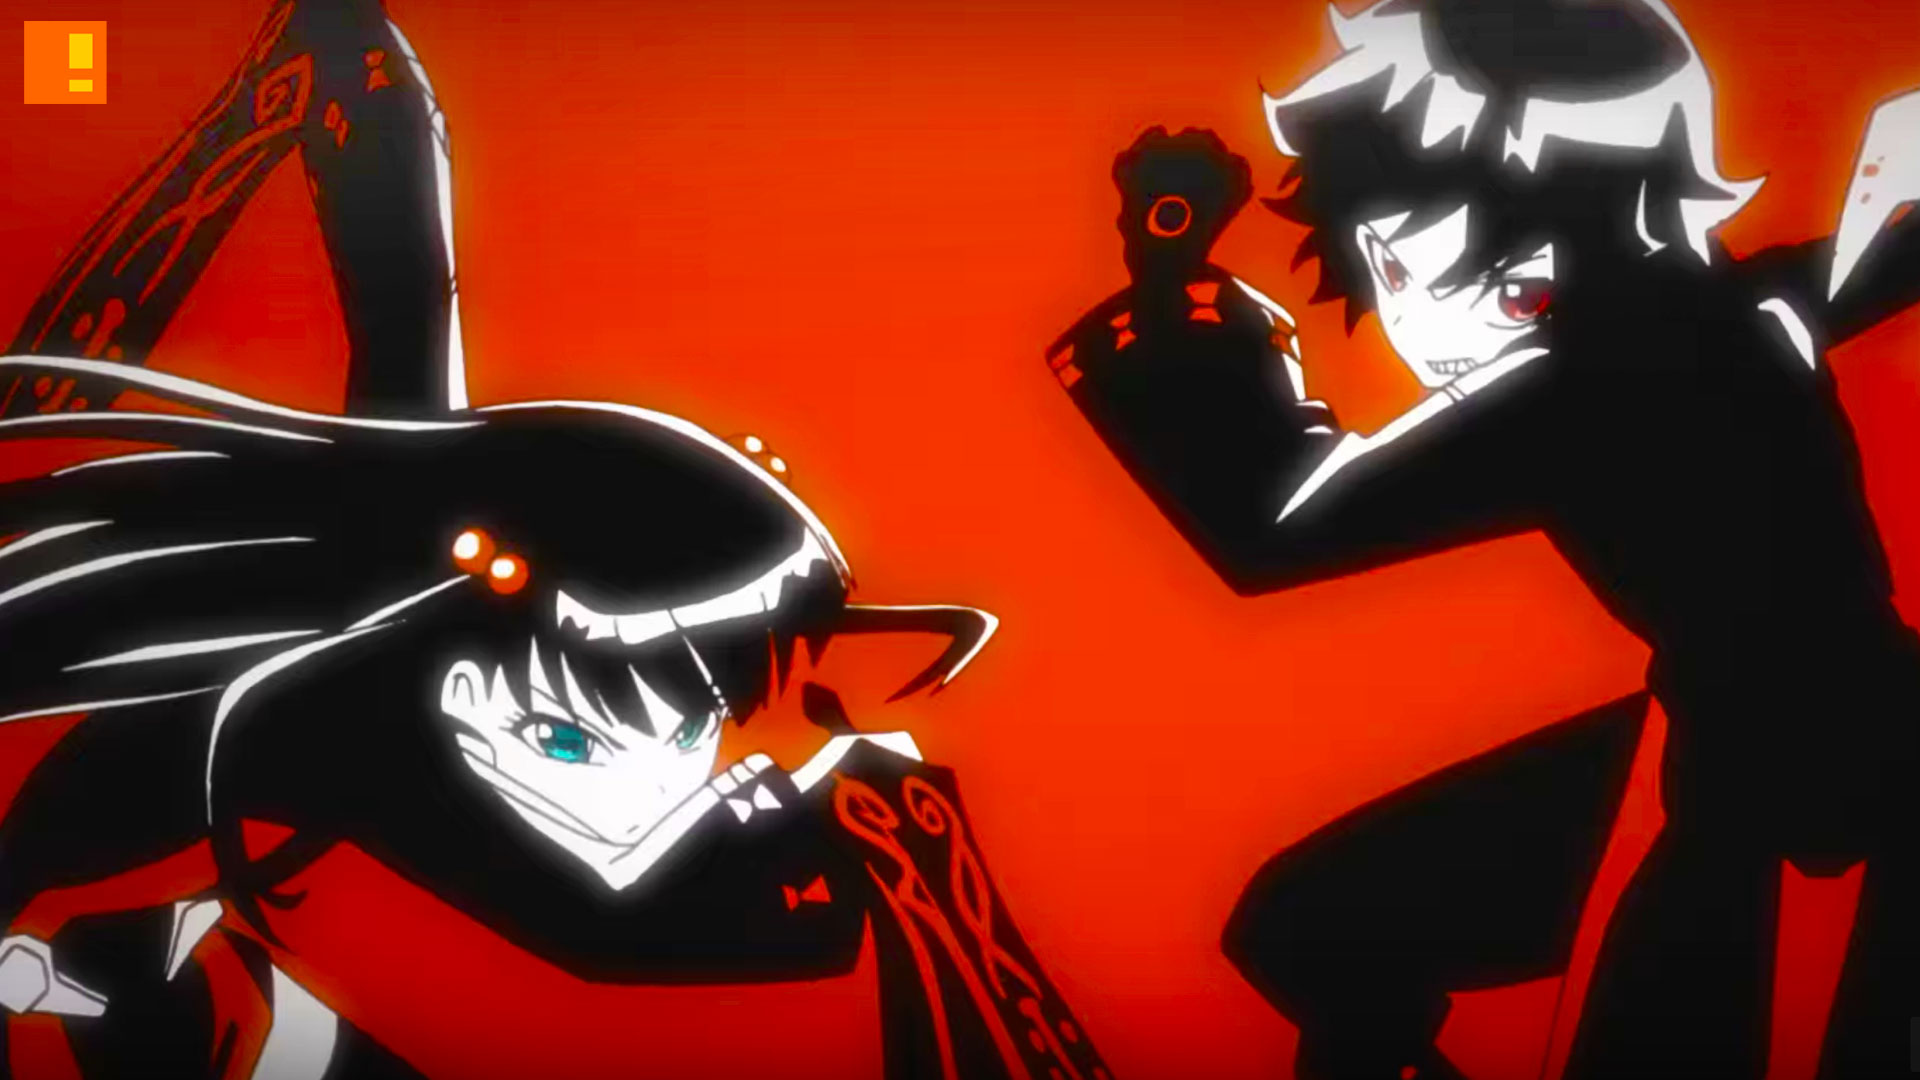 twin star exorcists. the action pixel. @theactionpixel